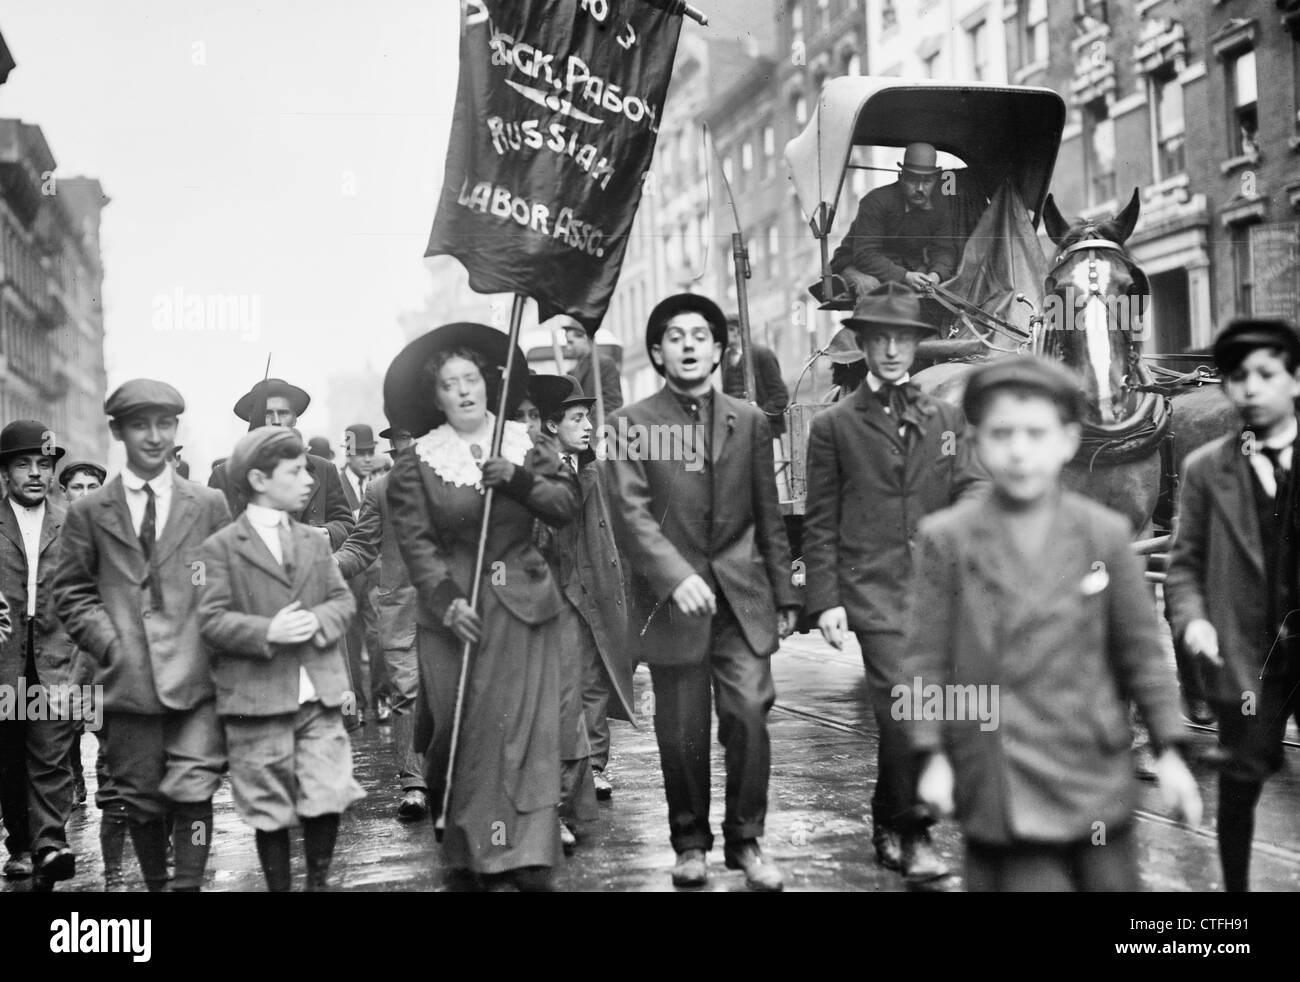 Russian Labor Association in Labor Day Parade, New York City, 1909 Stock Photo